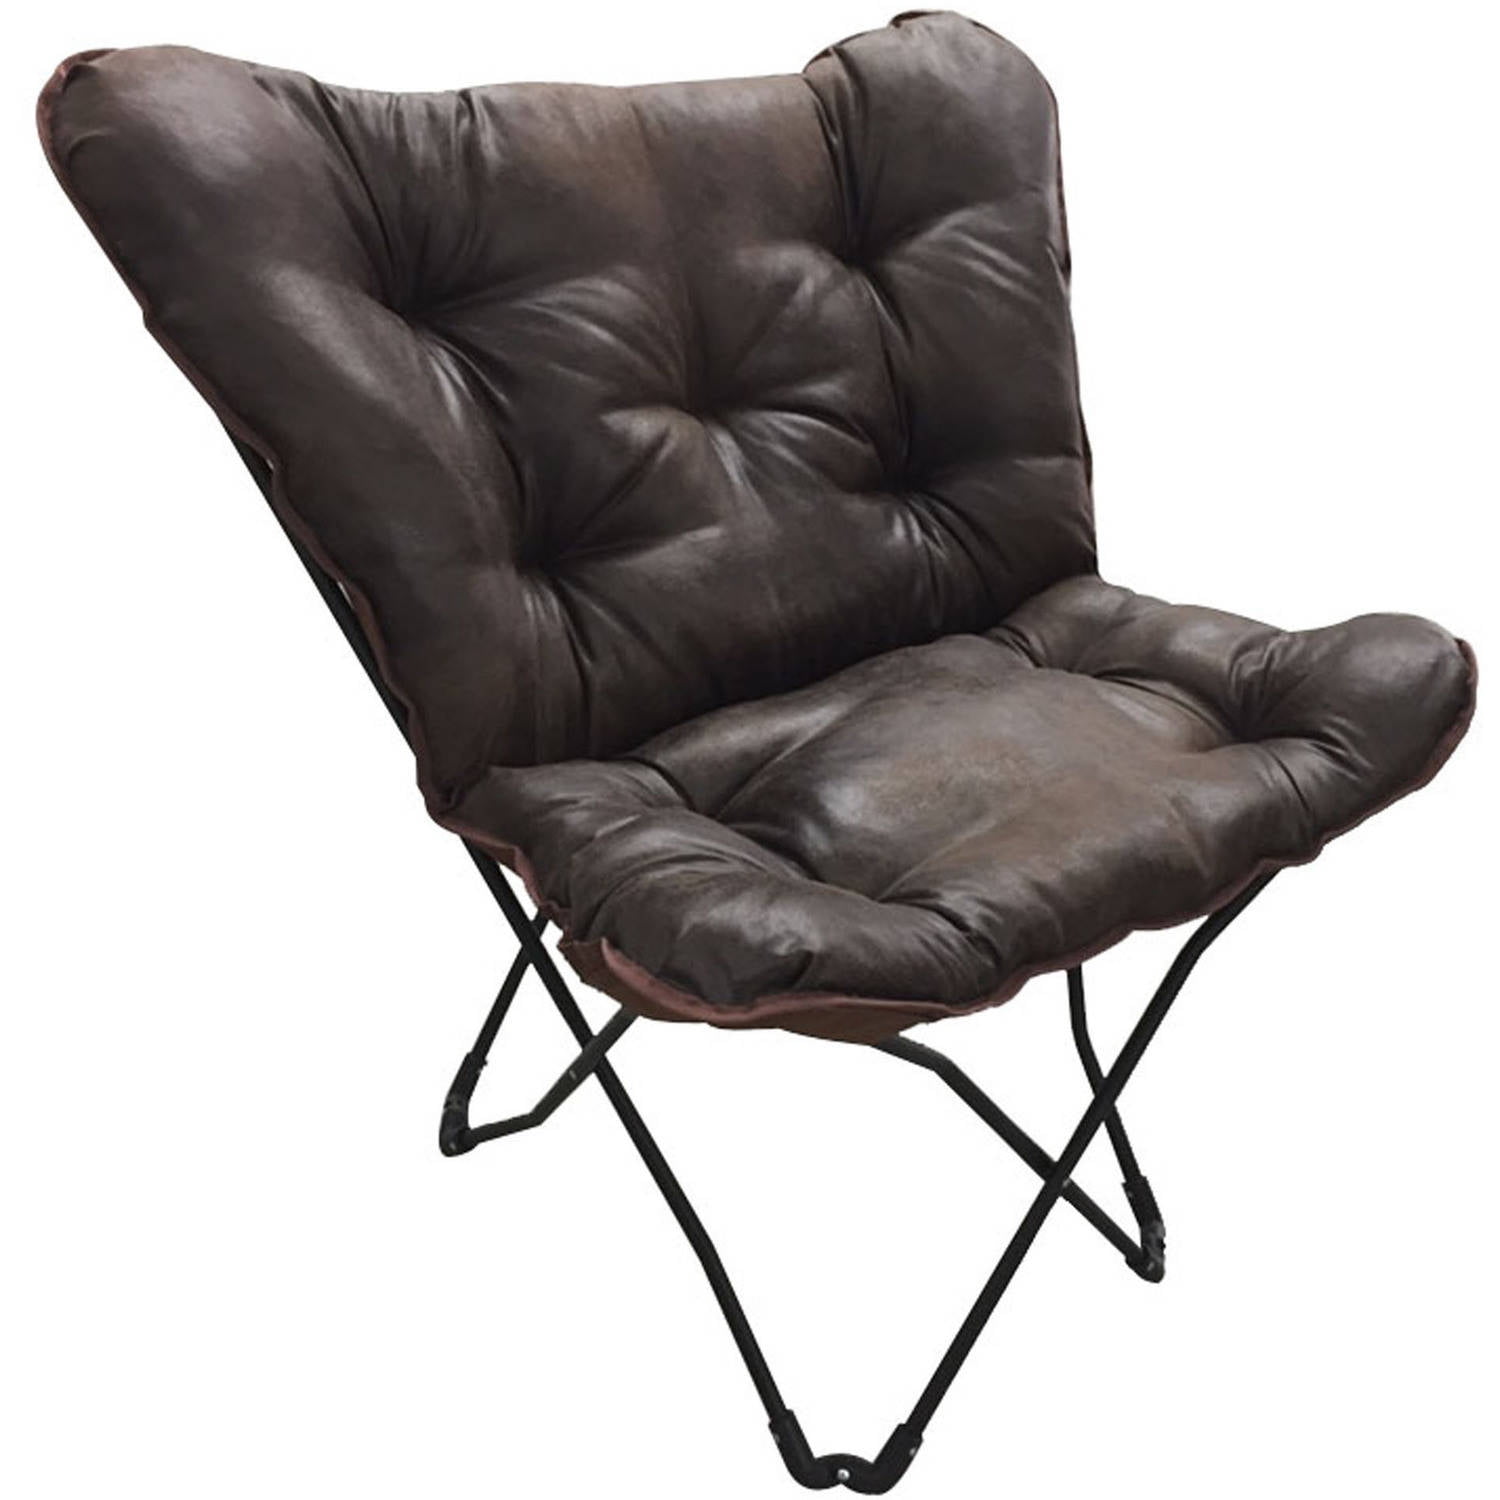 Mainstays Soft Faux Leather Butterfly Chair